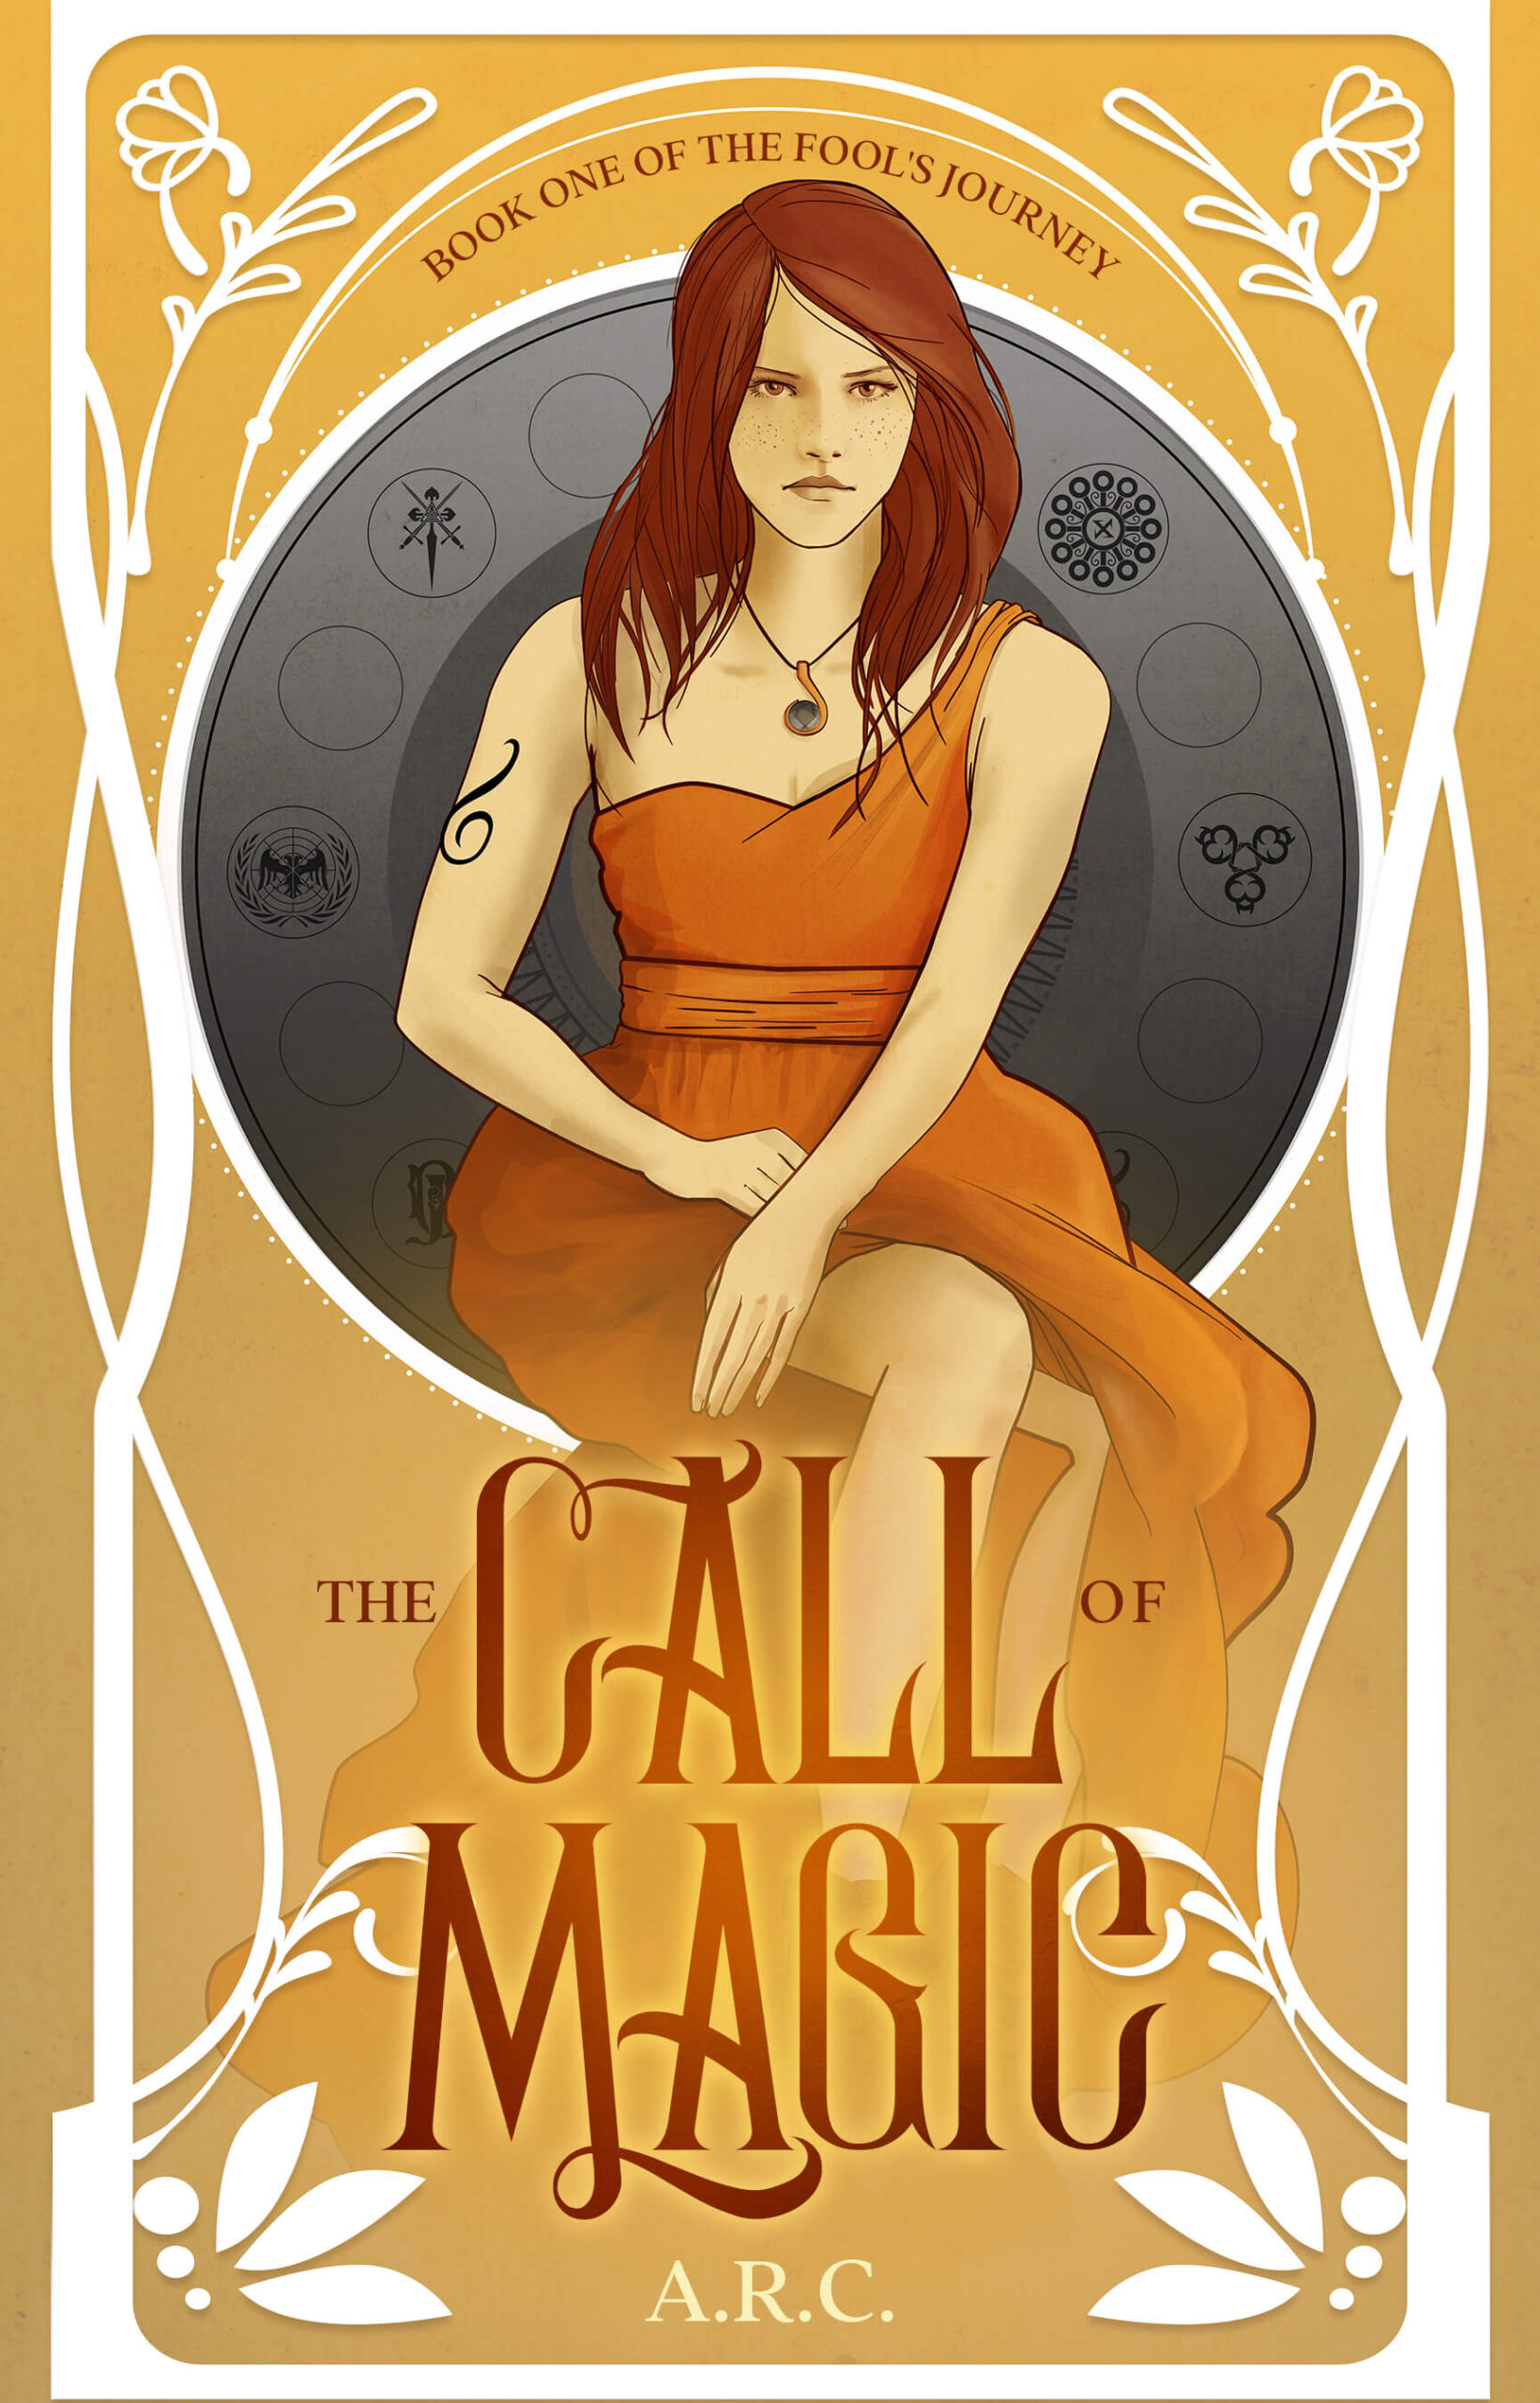 The Call of Magic – Book One of the Fool’s Journey by A. R. C.